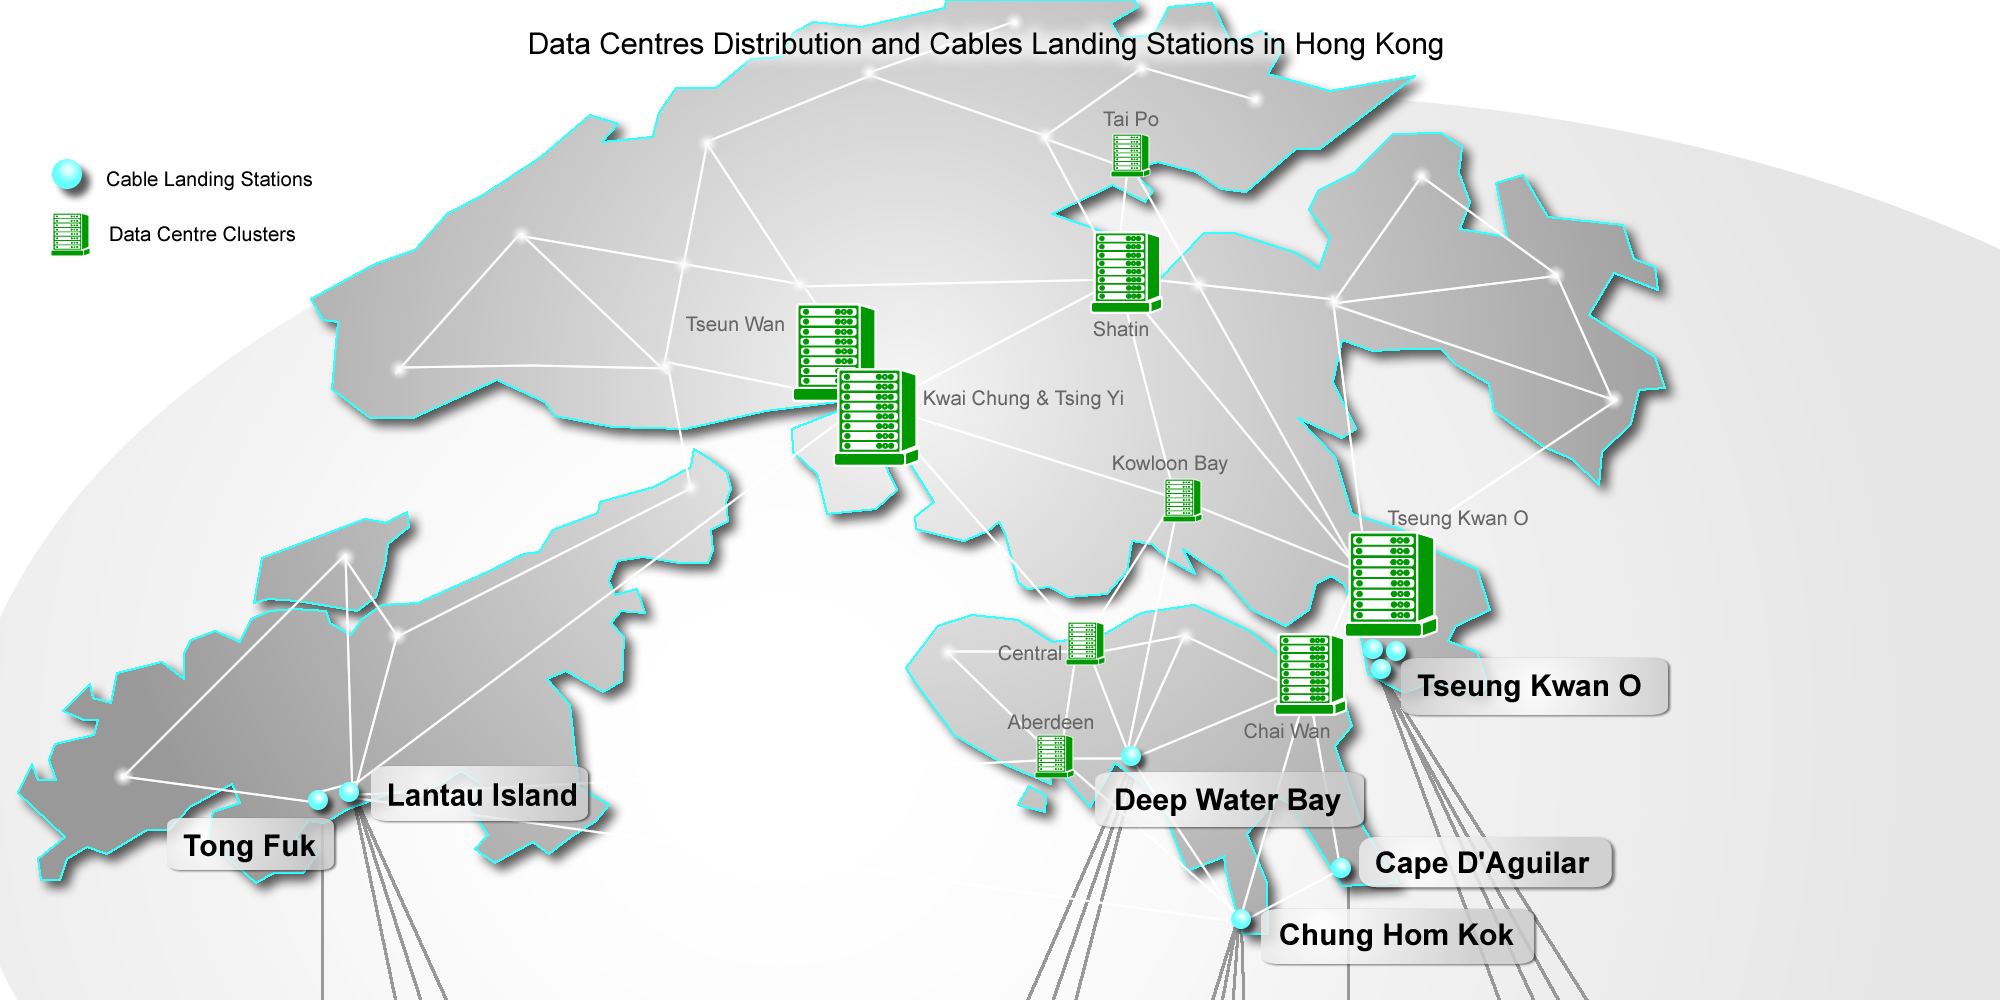 Data Centres and Cable Landing Stations